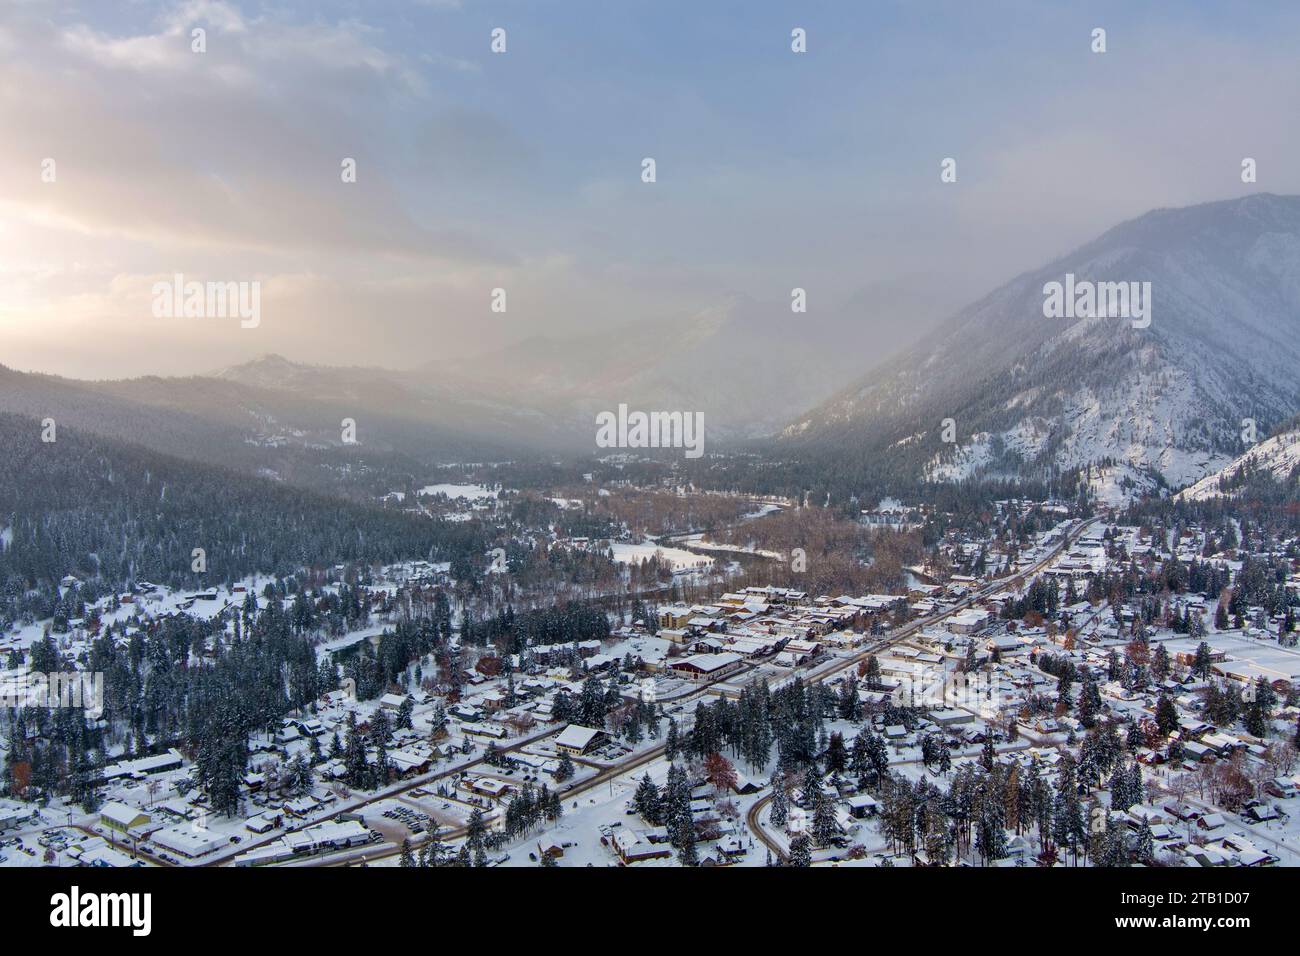 Aerial view of Leavenworth, Washington at sunrise in December Stock Photo